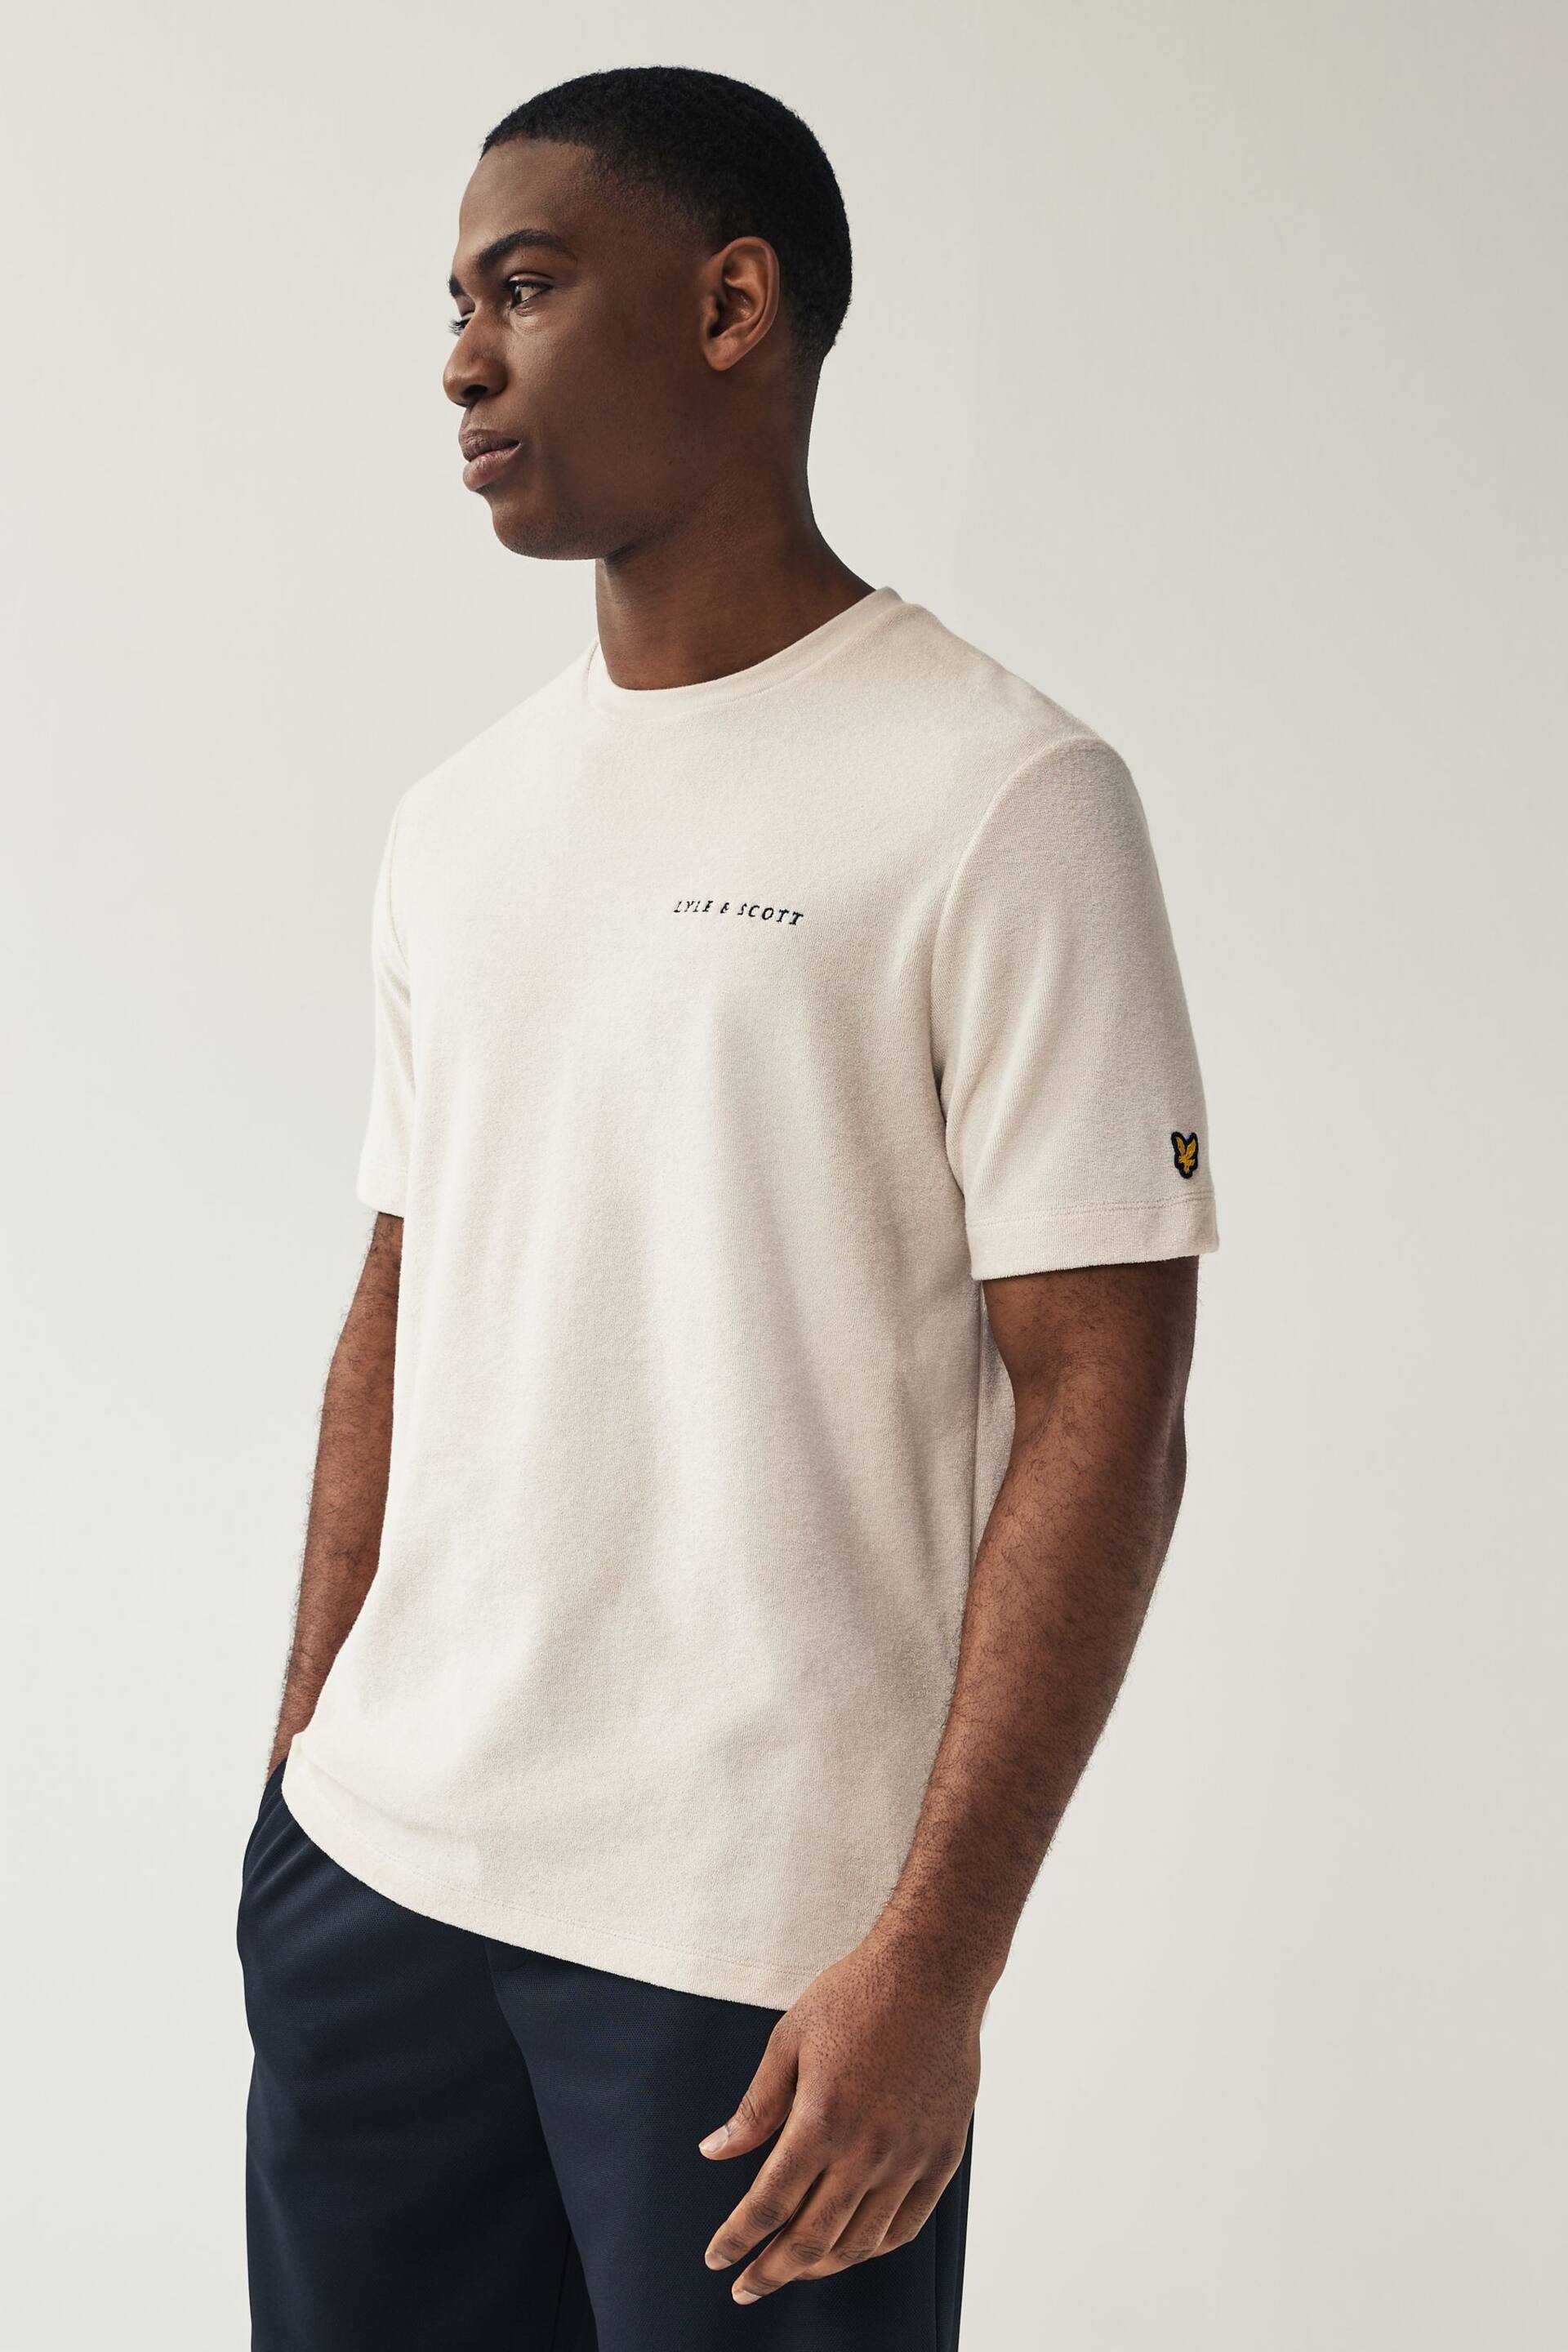 Lyle & Scott Towelling Embroidered Logo T-Shirt - Image 3 of 4